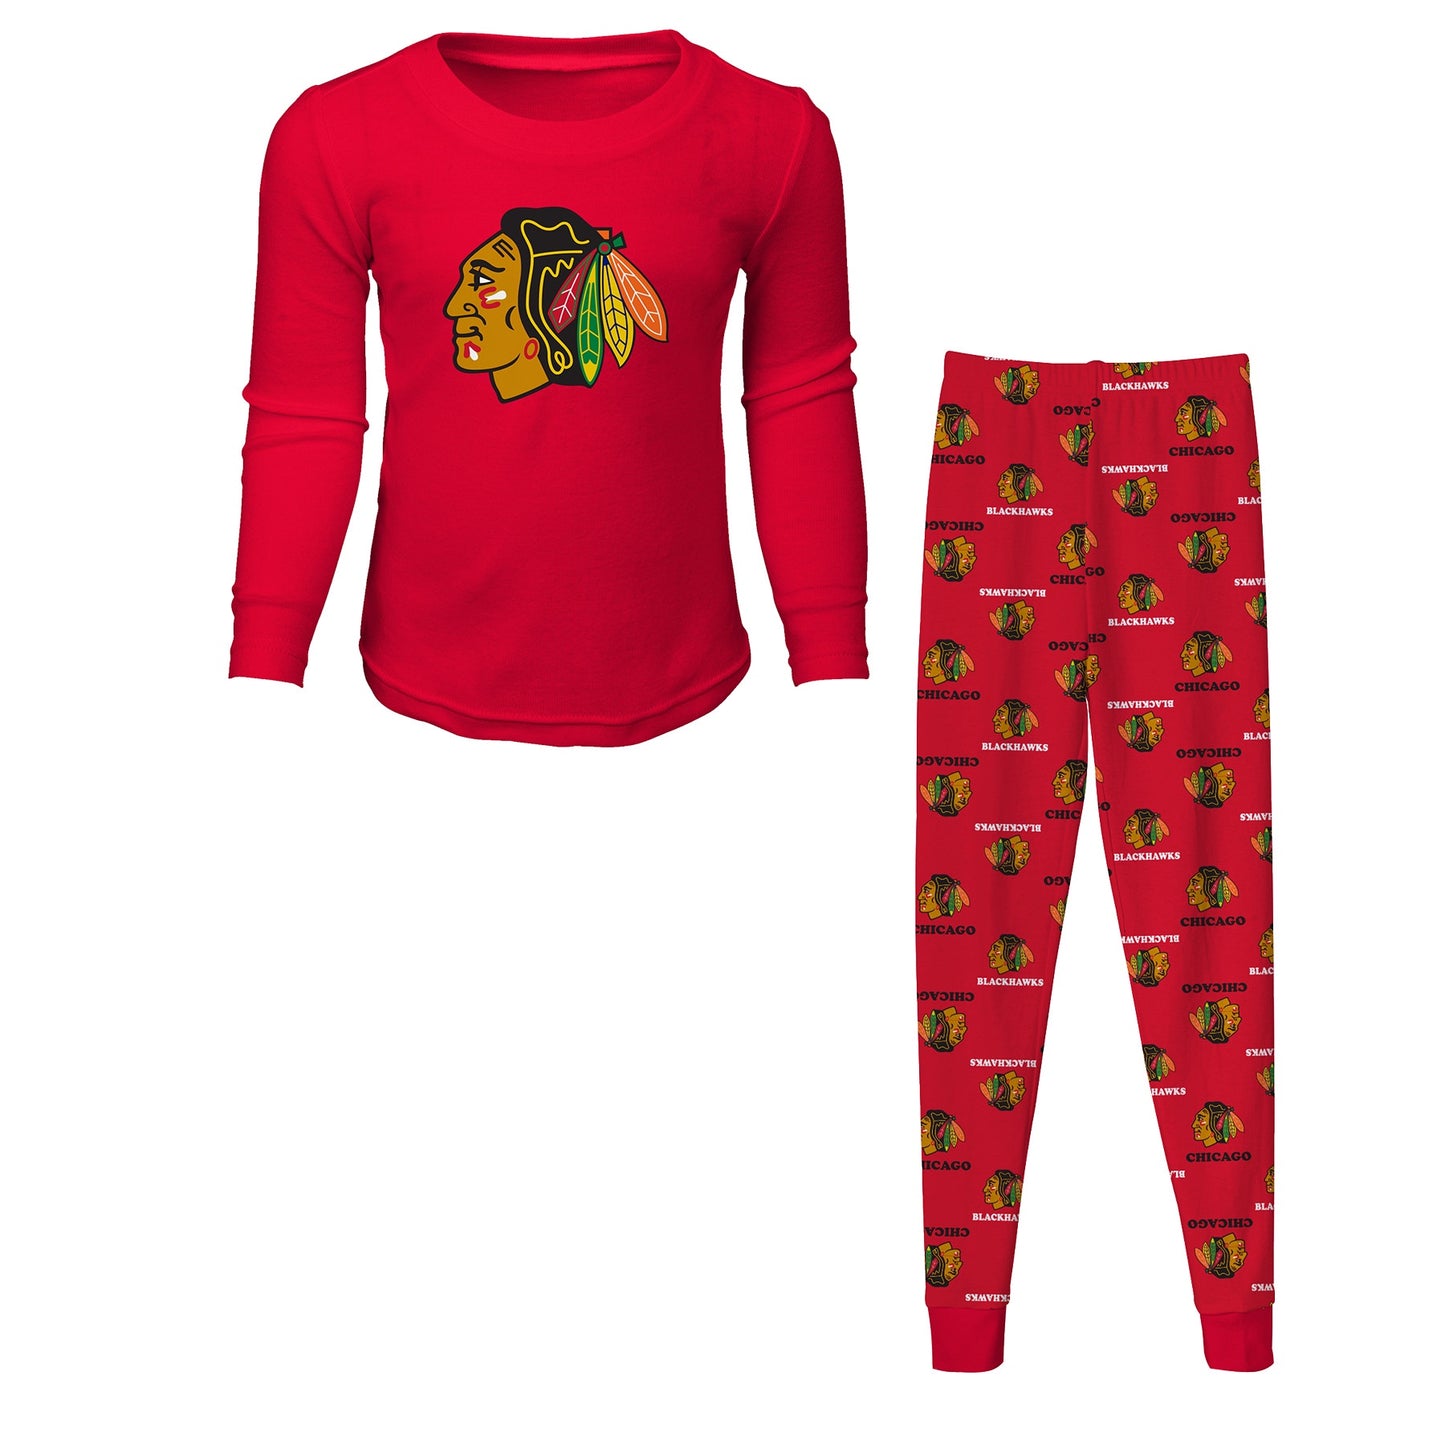 Toddler OuterStuff NHL Kids Chicago Blackhawks Red Long Sleeve Tee and Pant Sleep Set